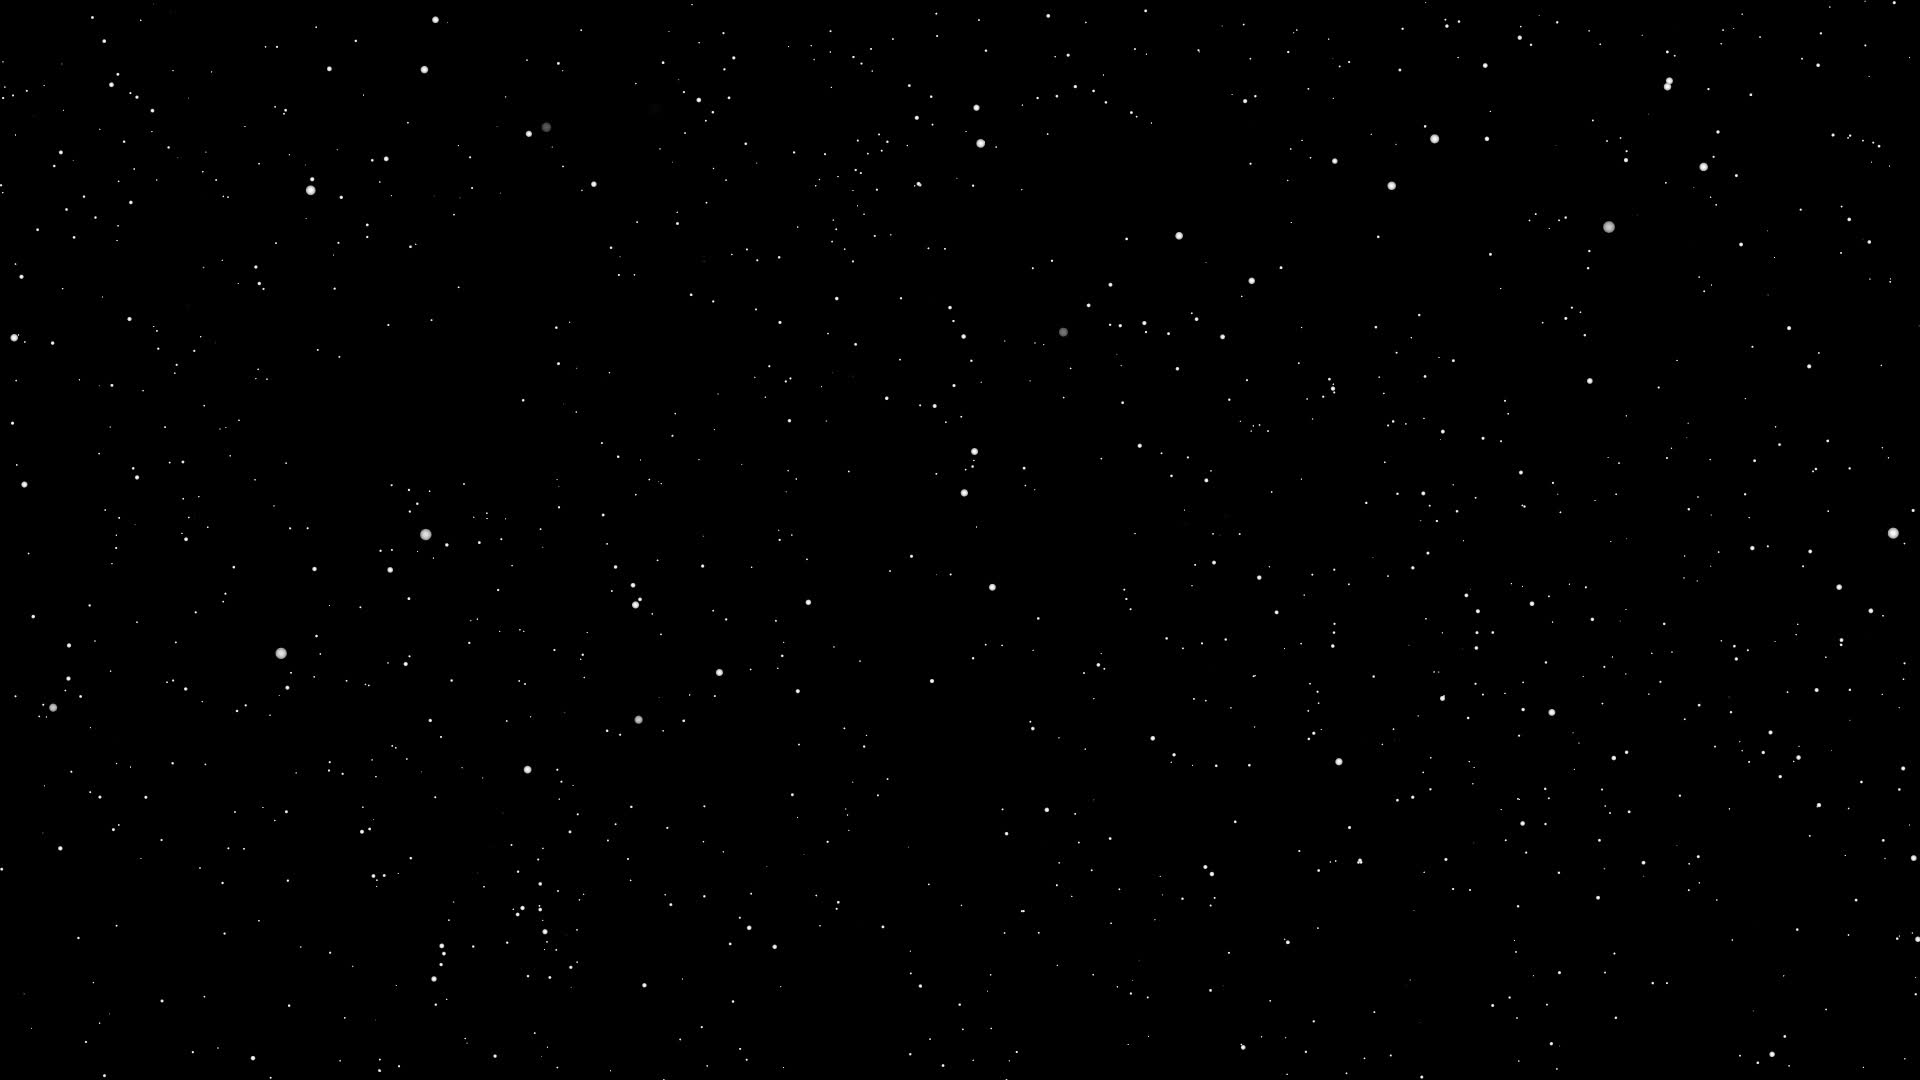 Simple Stars Wallpapers